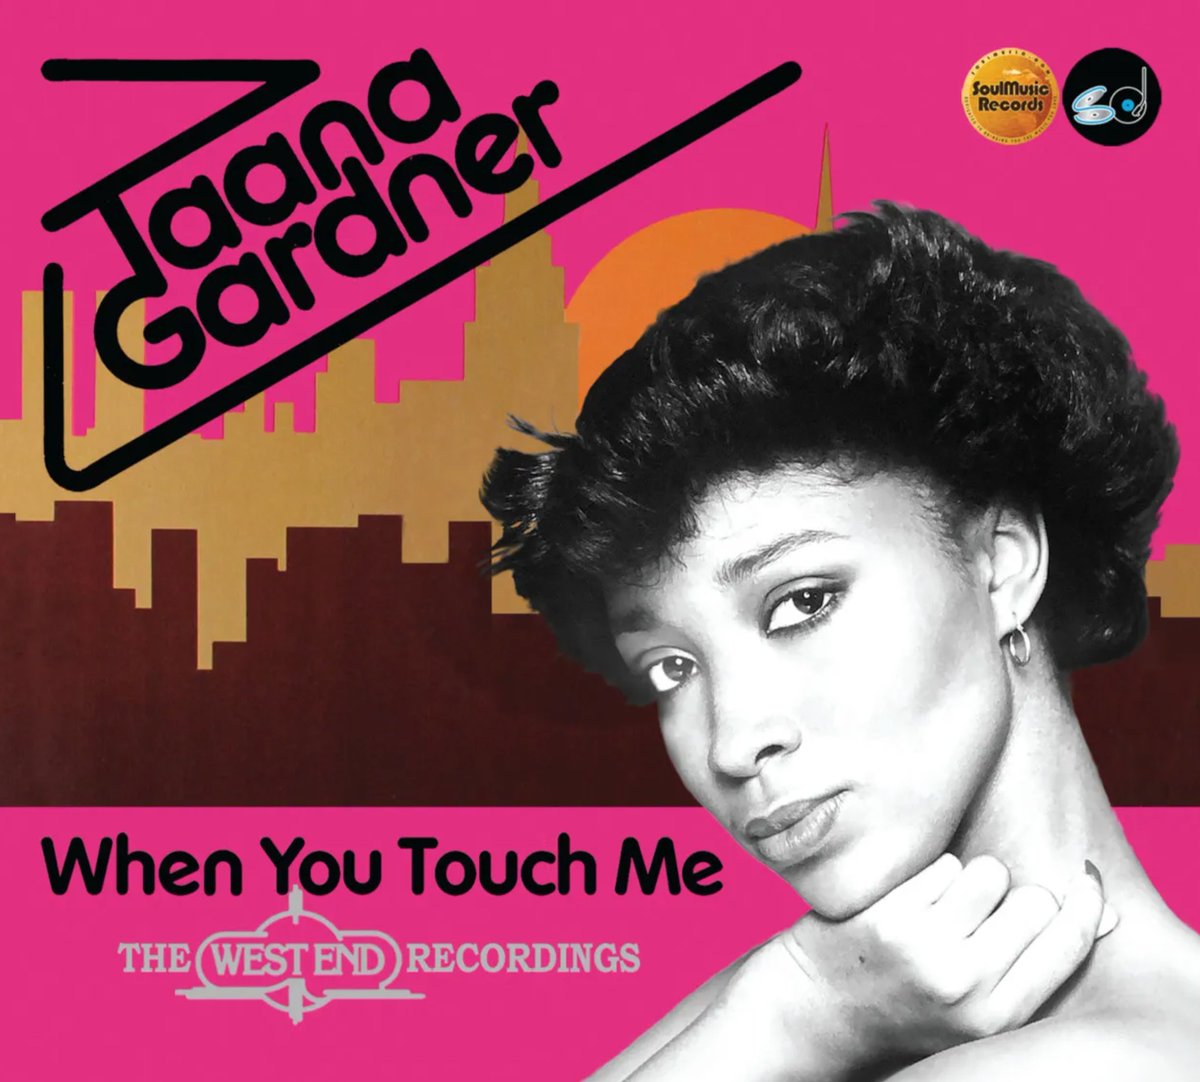 Soul Music Records in association with Second Disc present a 2CD set feat the full-length debut album by disco vocalist Taana Gardner in its original form. It includes her single releases for West End Records released between 1981 and 2006. 👉 cherryred.co/TaanaGardner